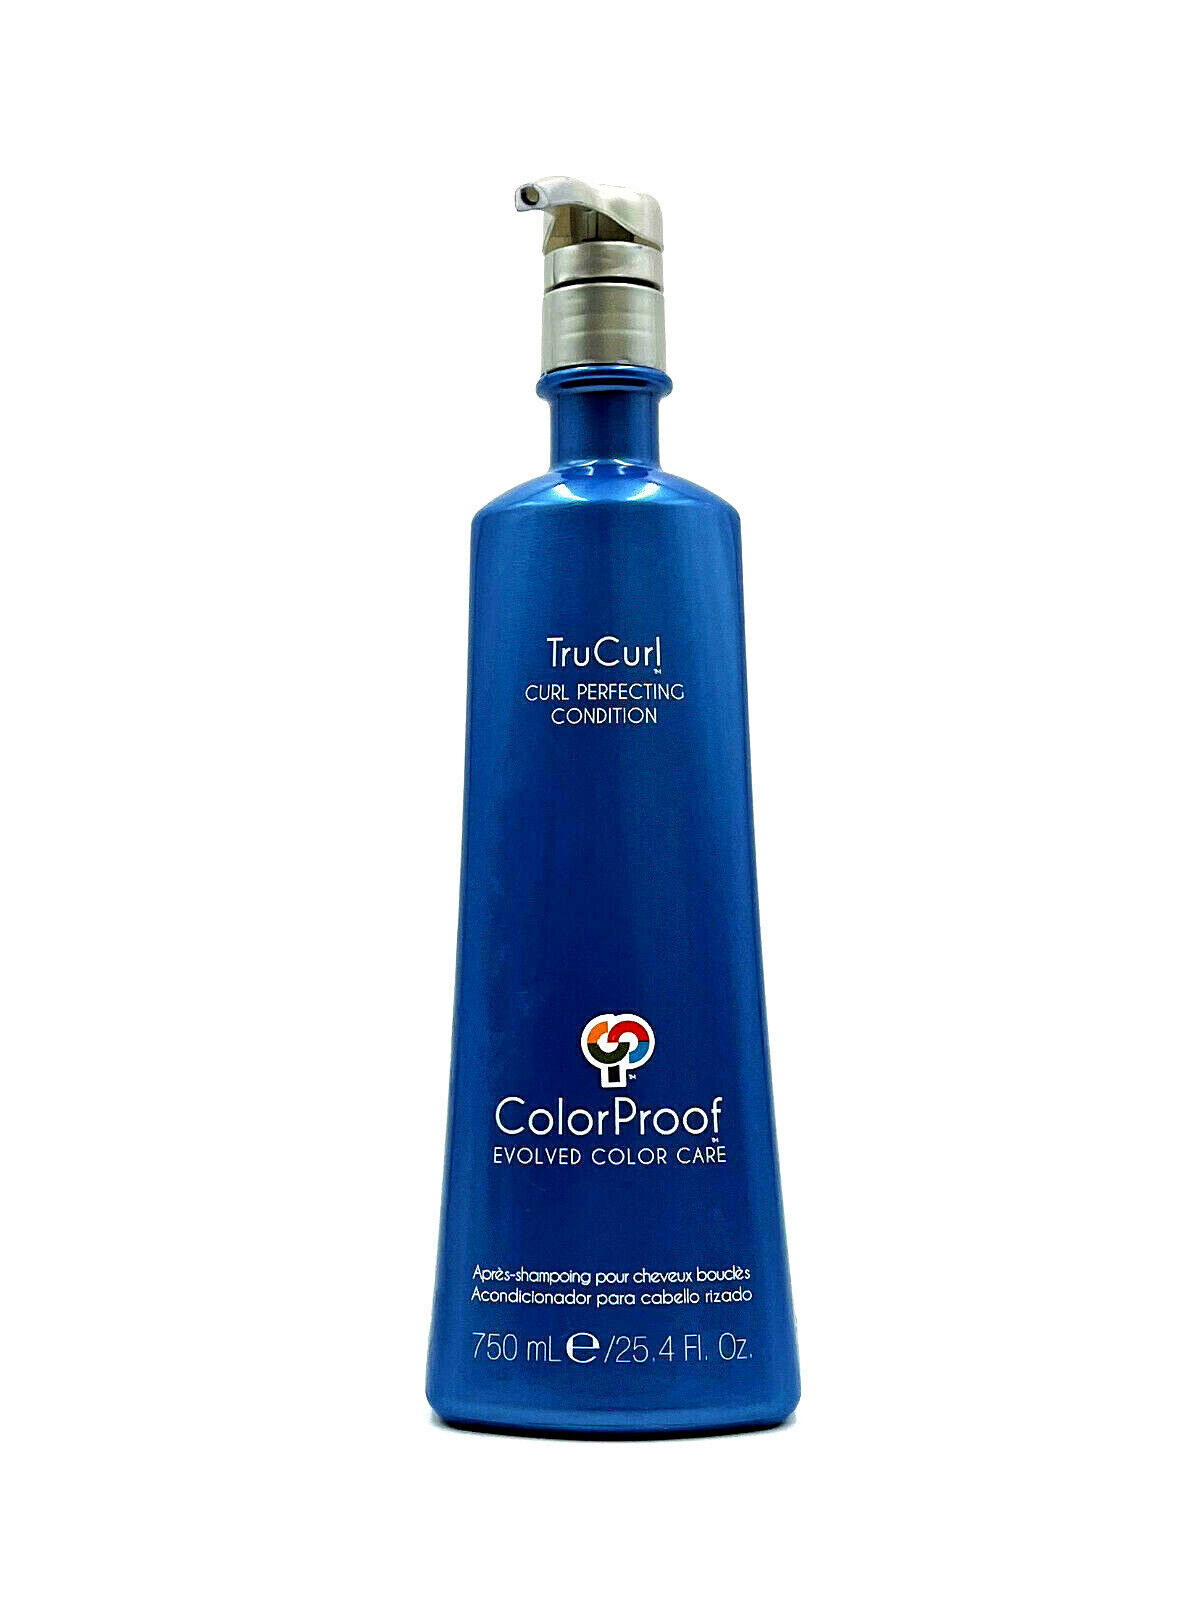 Primary image for ColorProof TruCurl Curl Perfecting Conditioner 25.4 oz